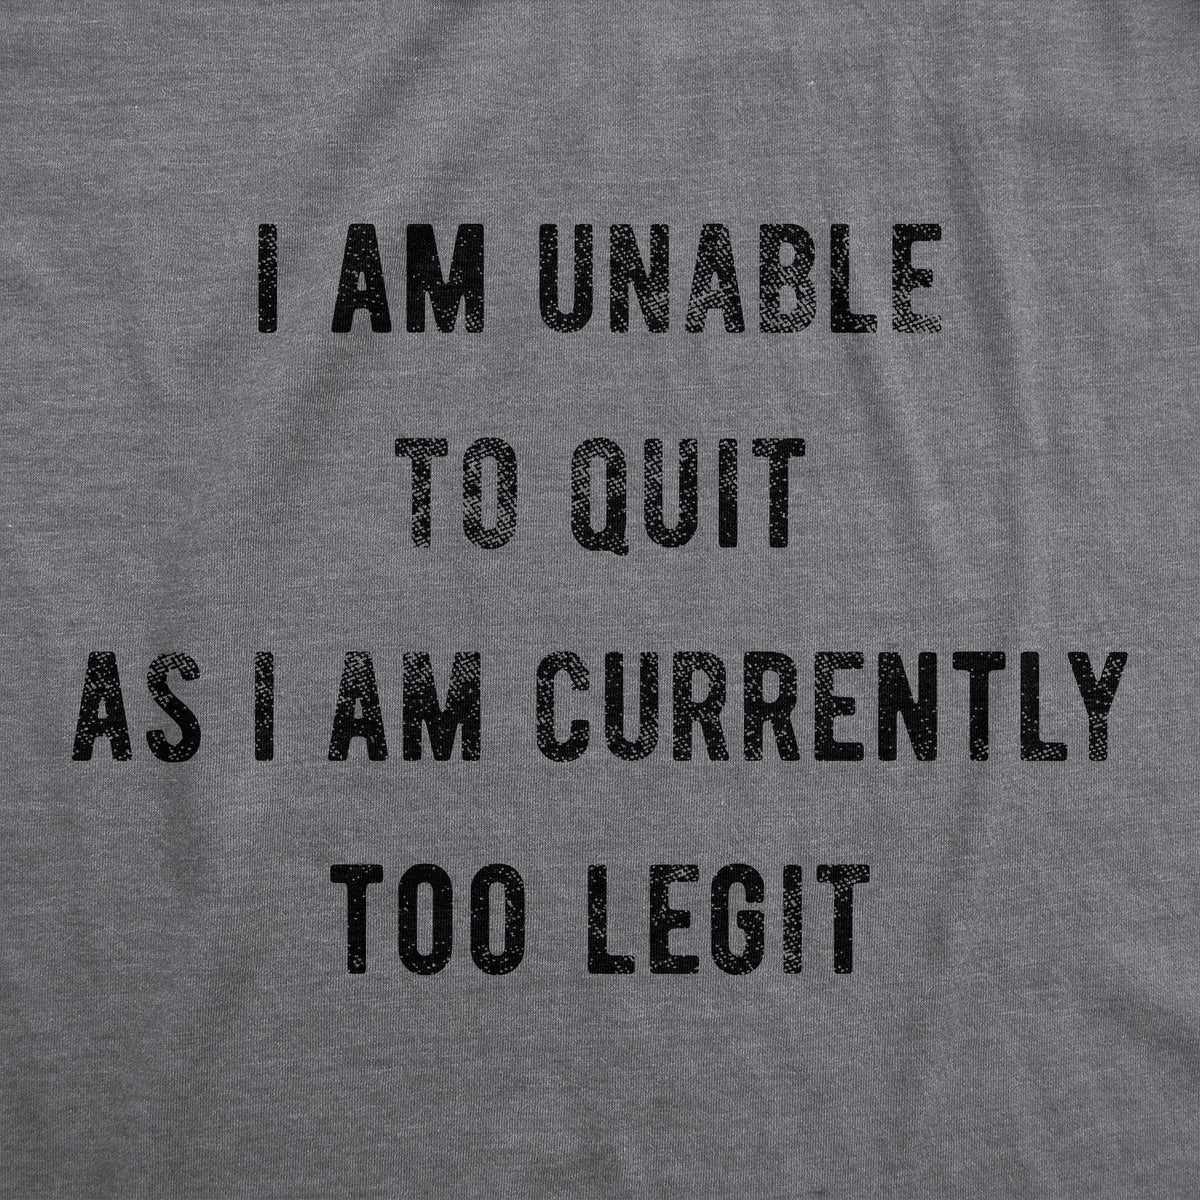 I Am Unable To Quit As I Am Currently Too Legit Men&#39;s Tshirt - Crazy Dog T-Shirts